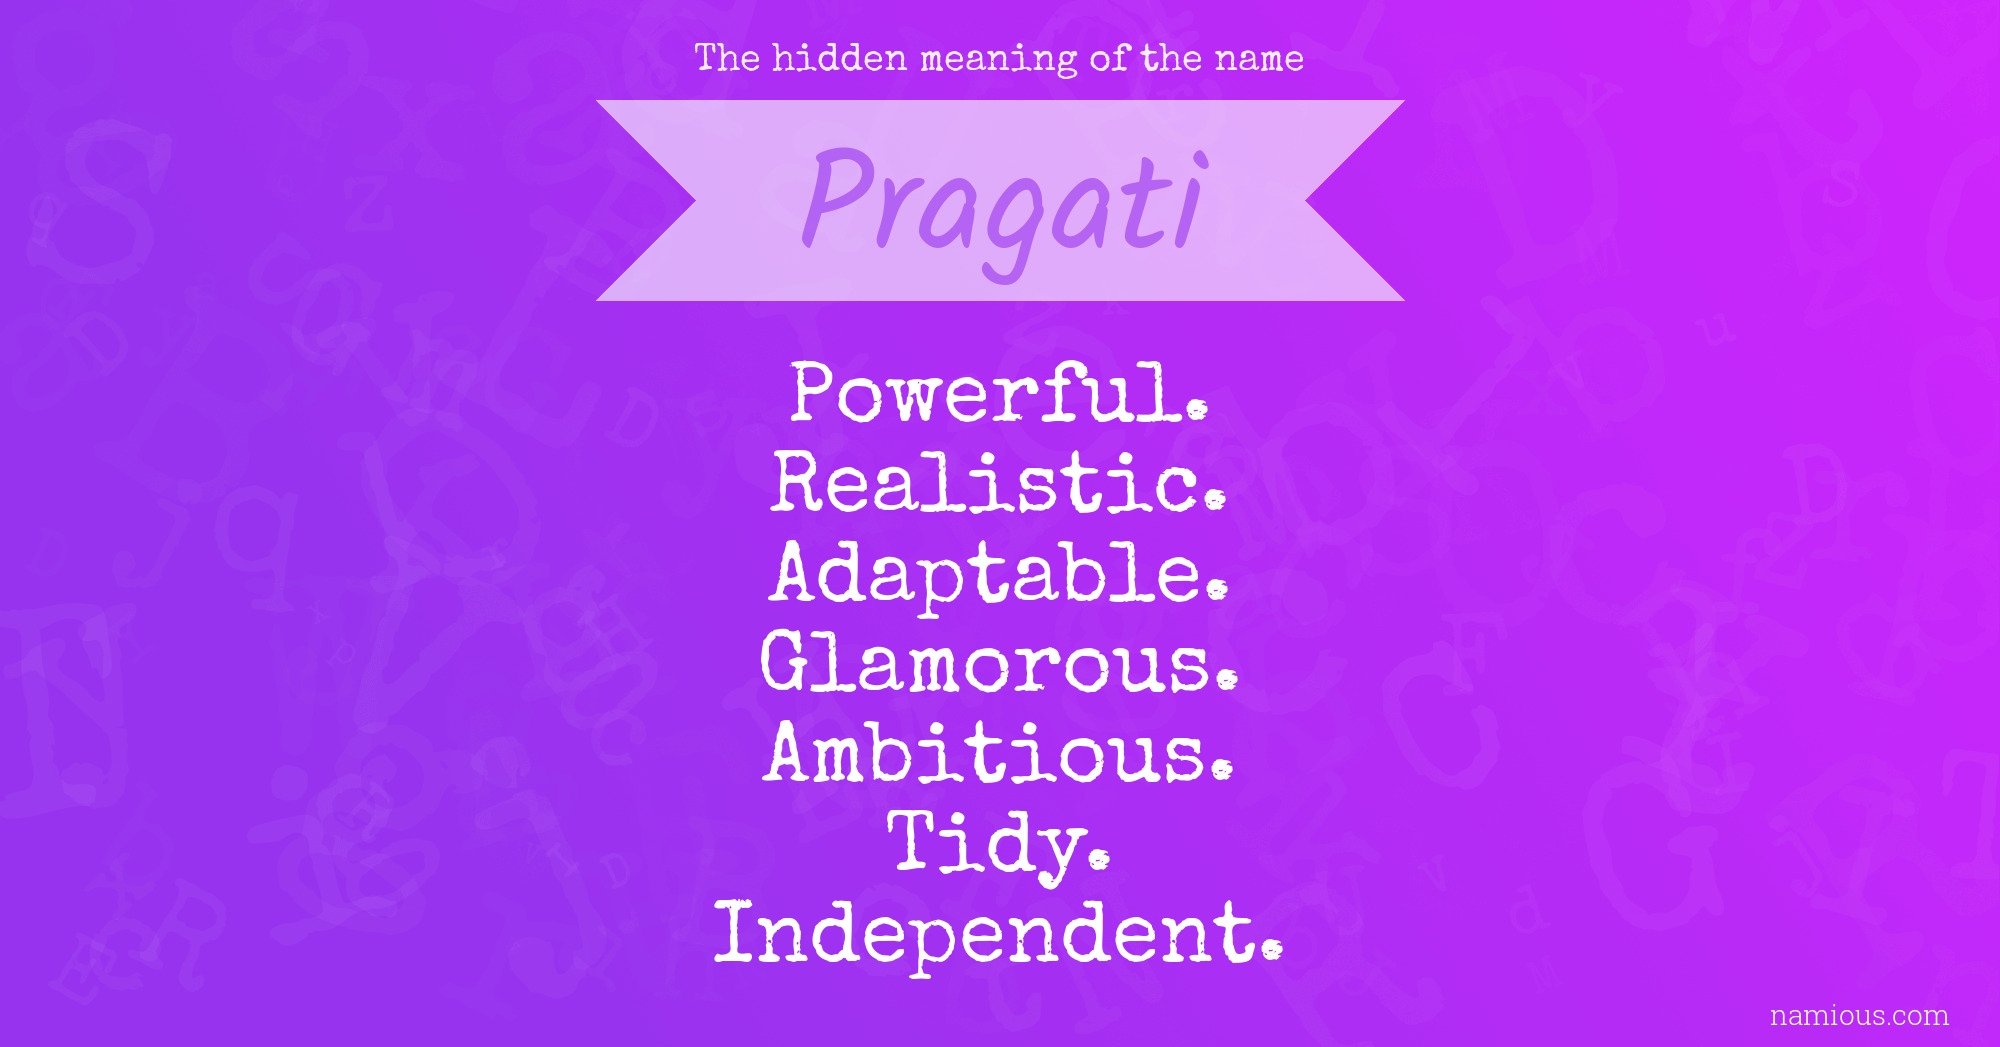 The hidden meaning of the name Pragati